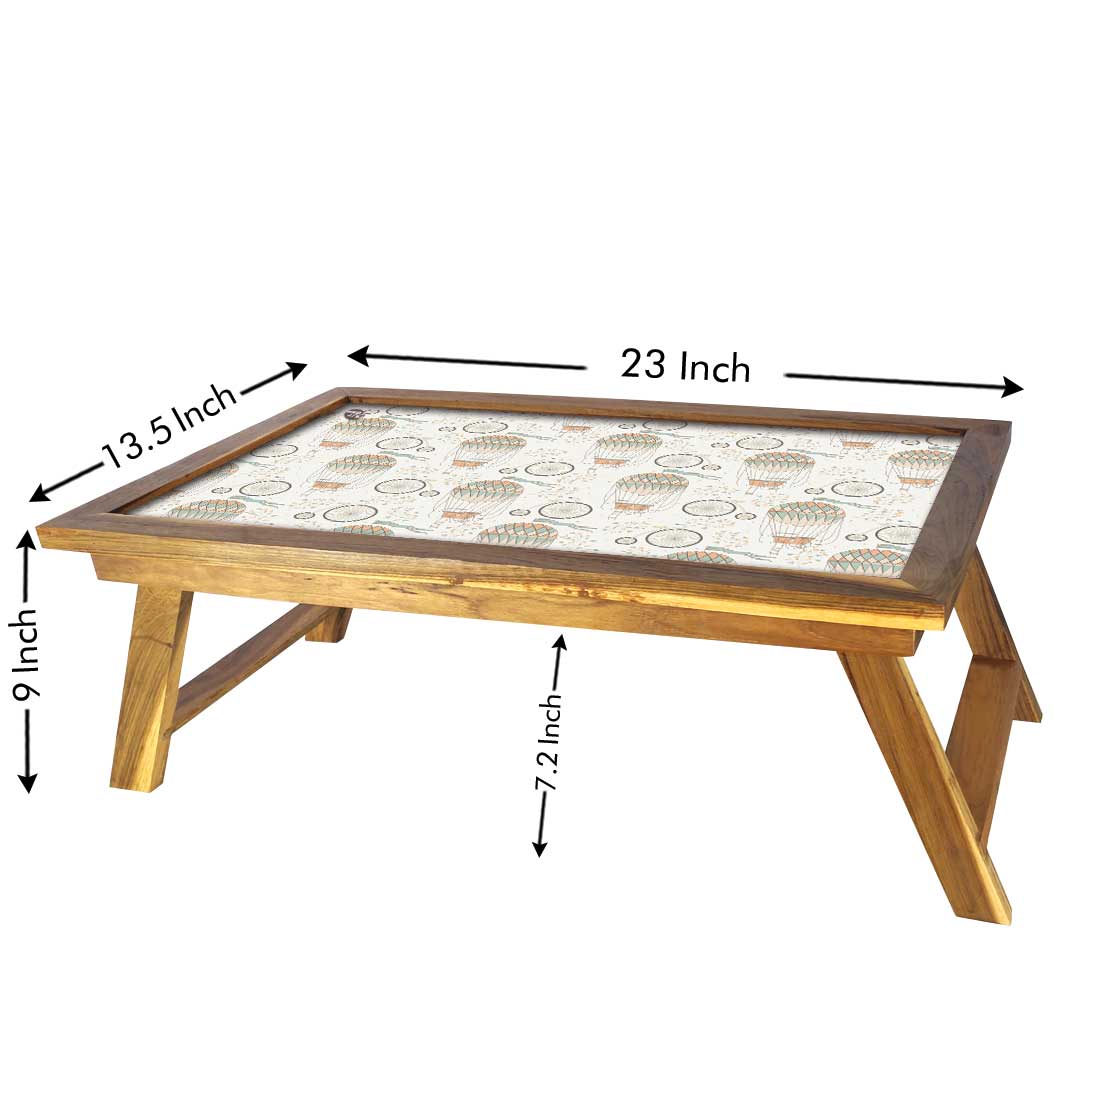 Nutcase Bed Tray with Folding Legs Breakfast Table For Home Lapdesk- Air Balloon Cycles Nutcase